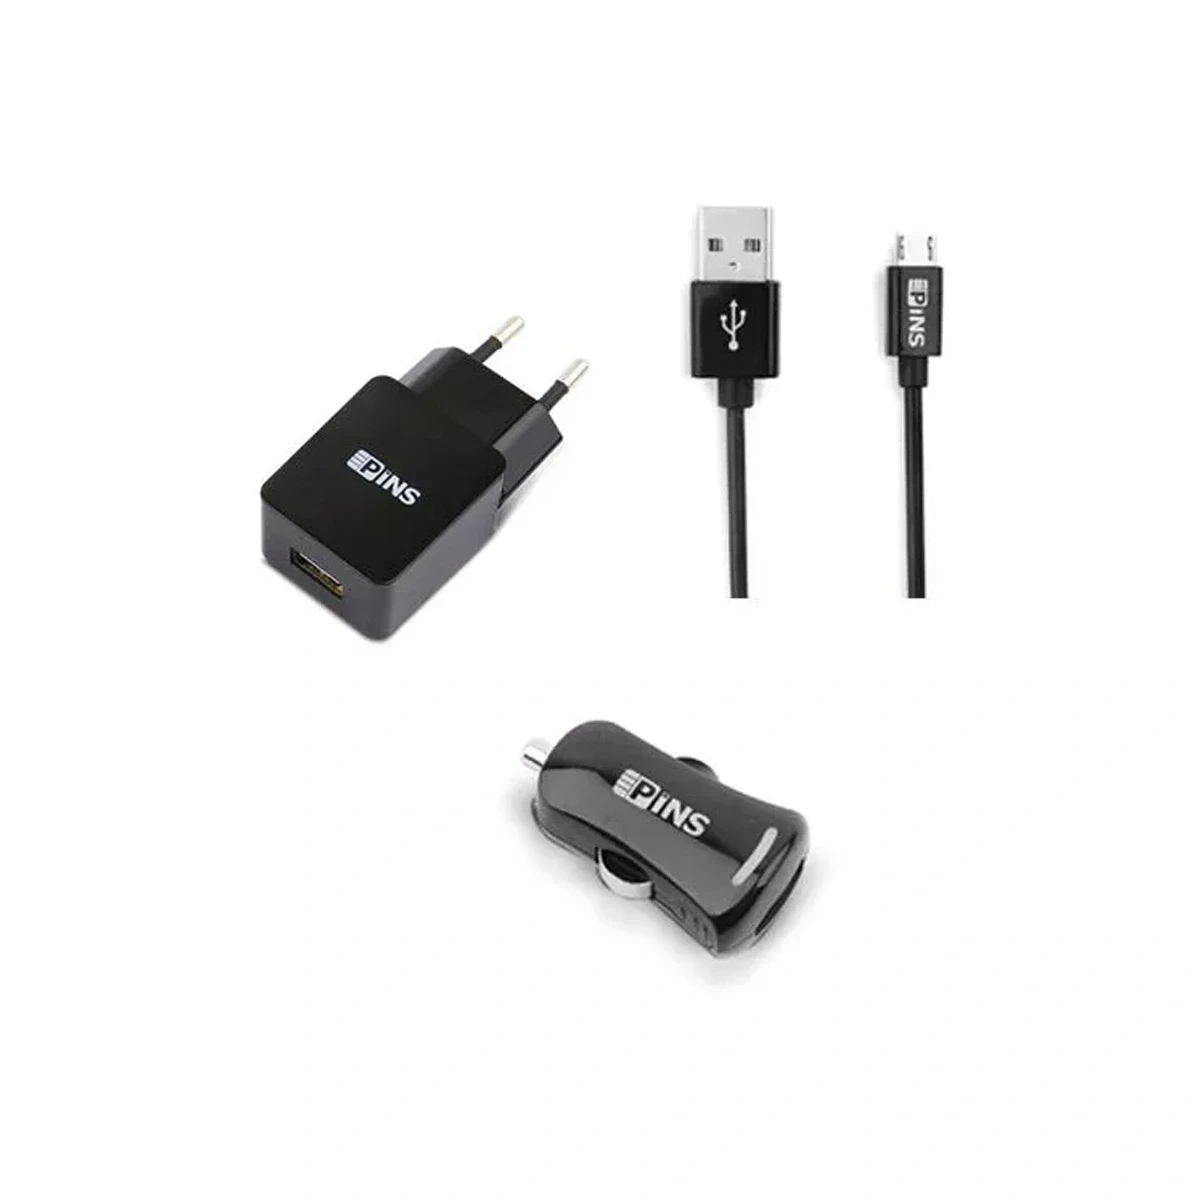 Pins Charger 3*1 Micro USB 1A